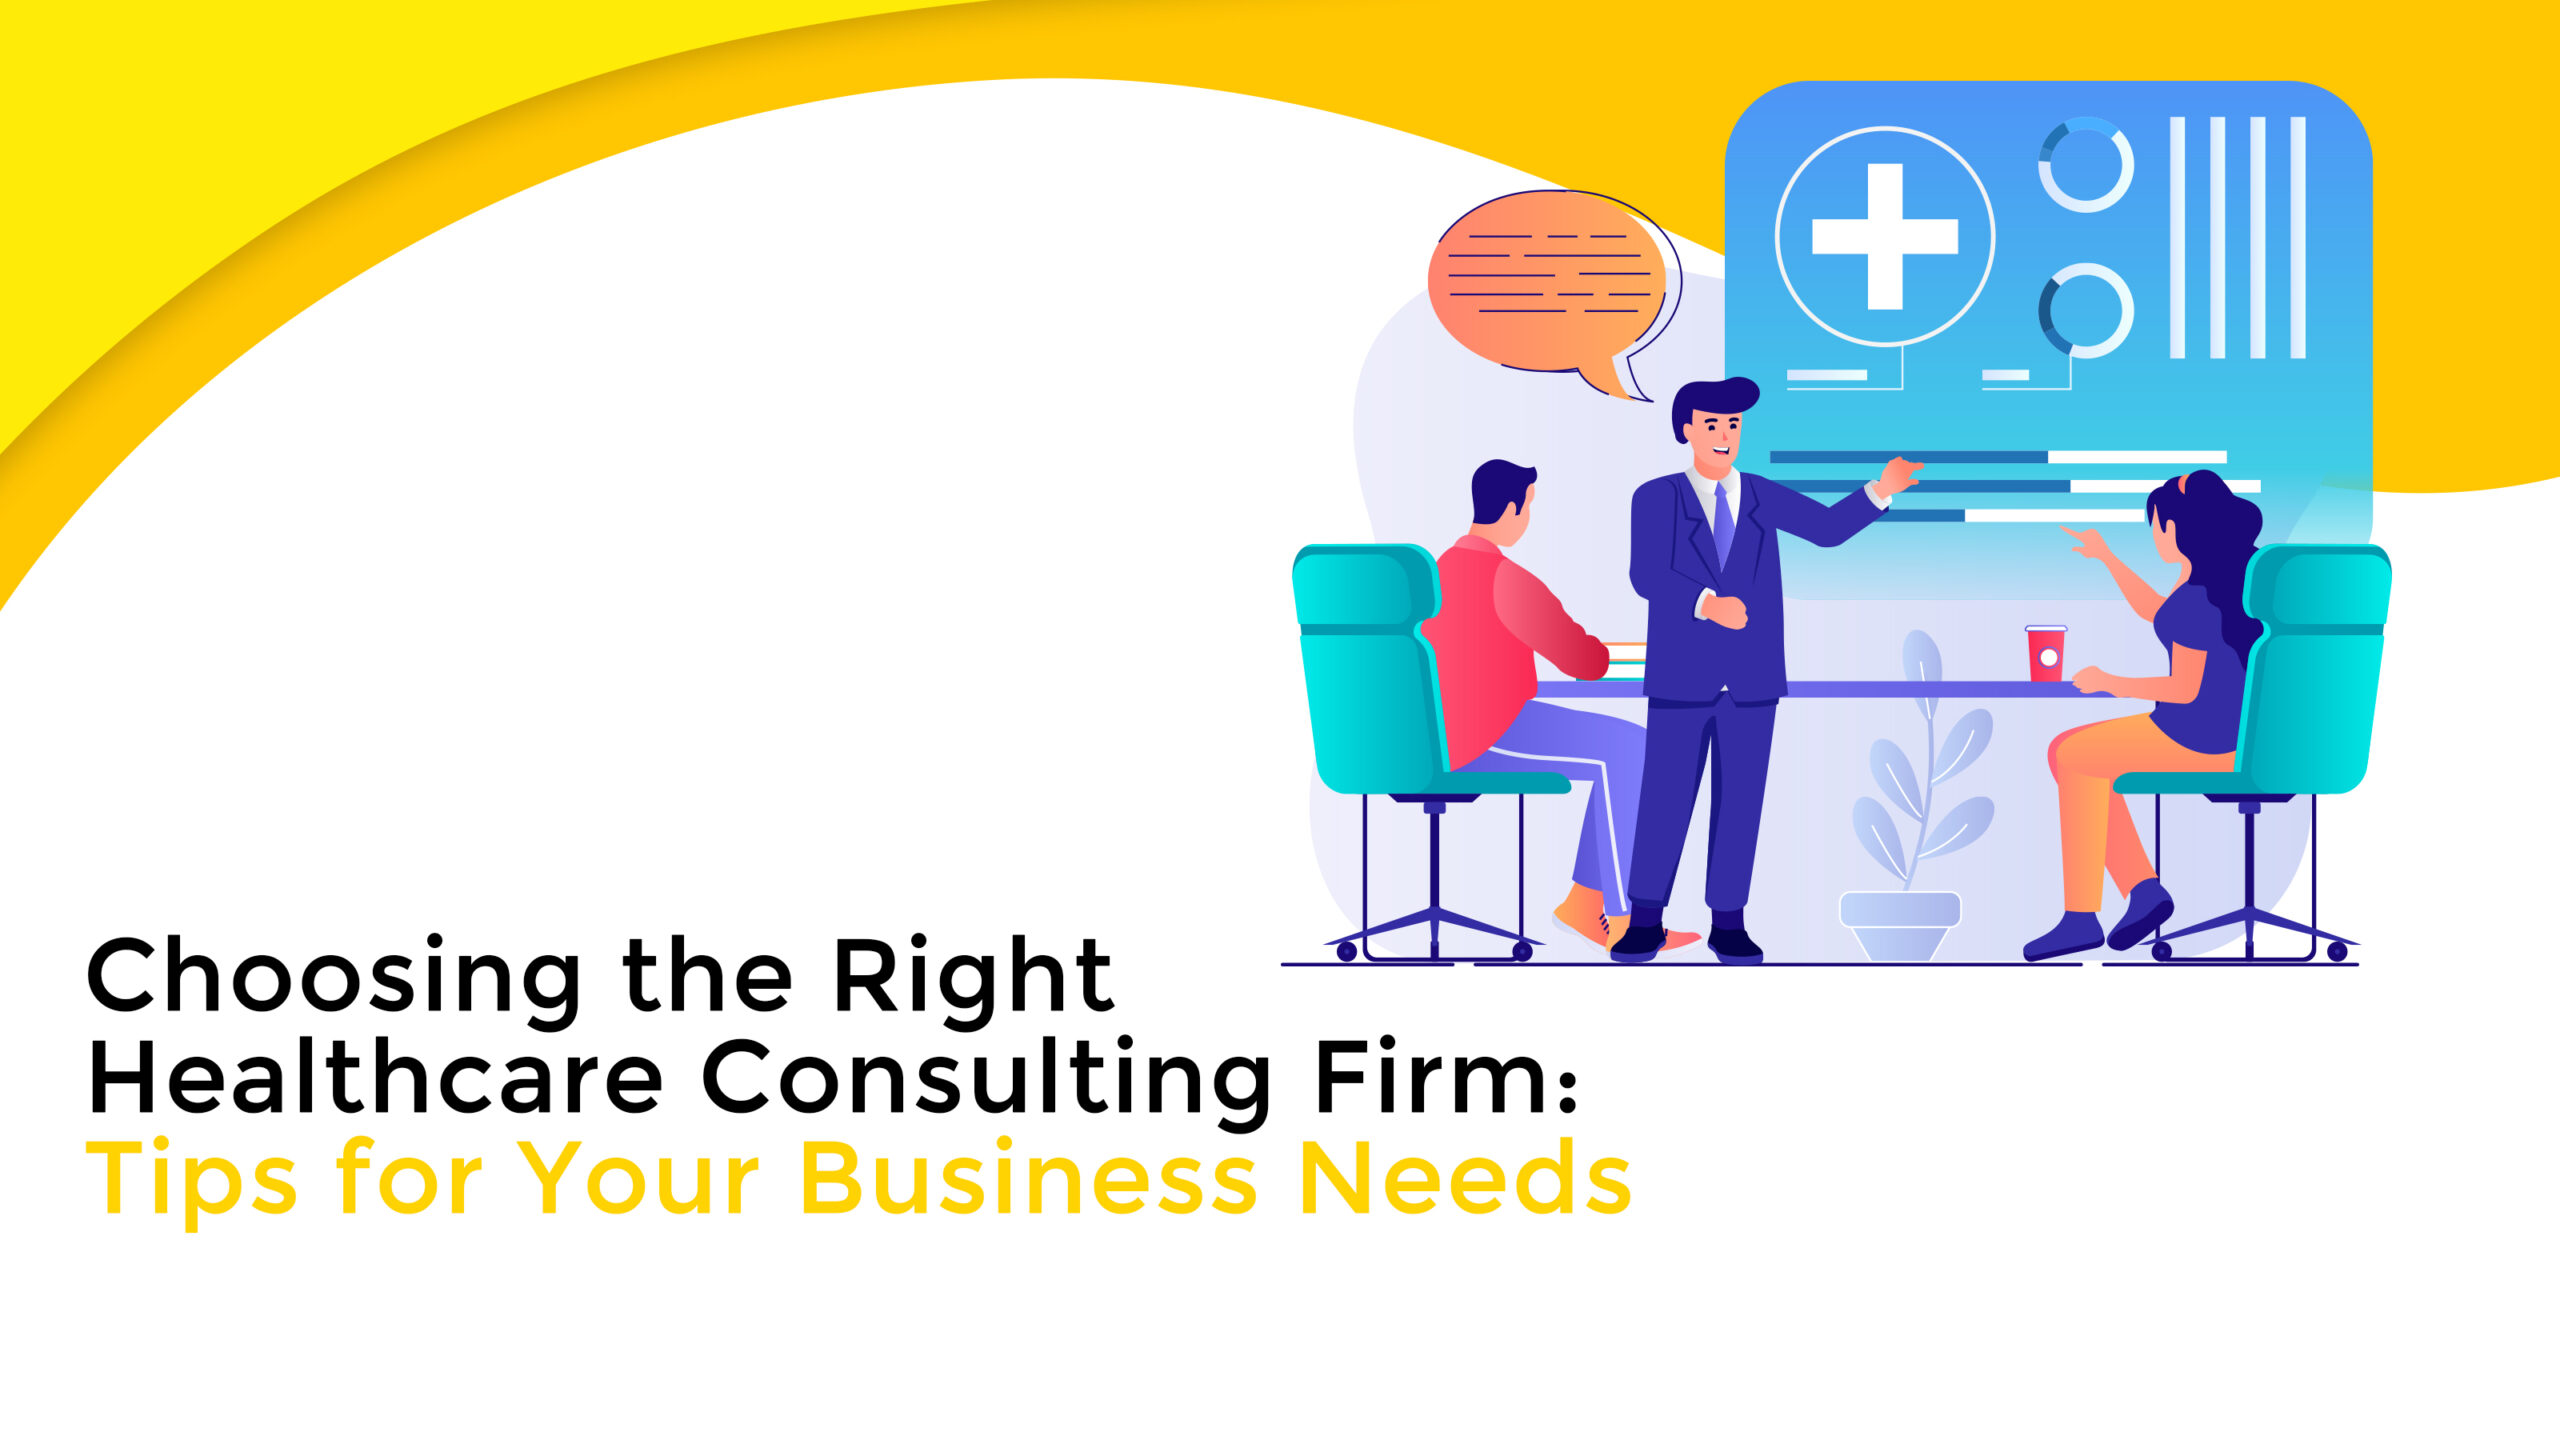 Choosing the Right Healthcare Consulting Firm